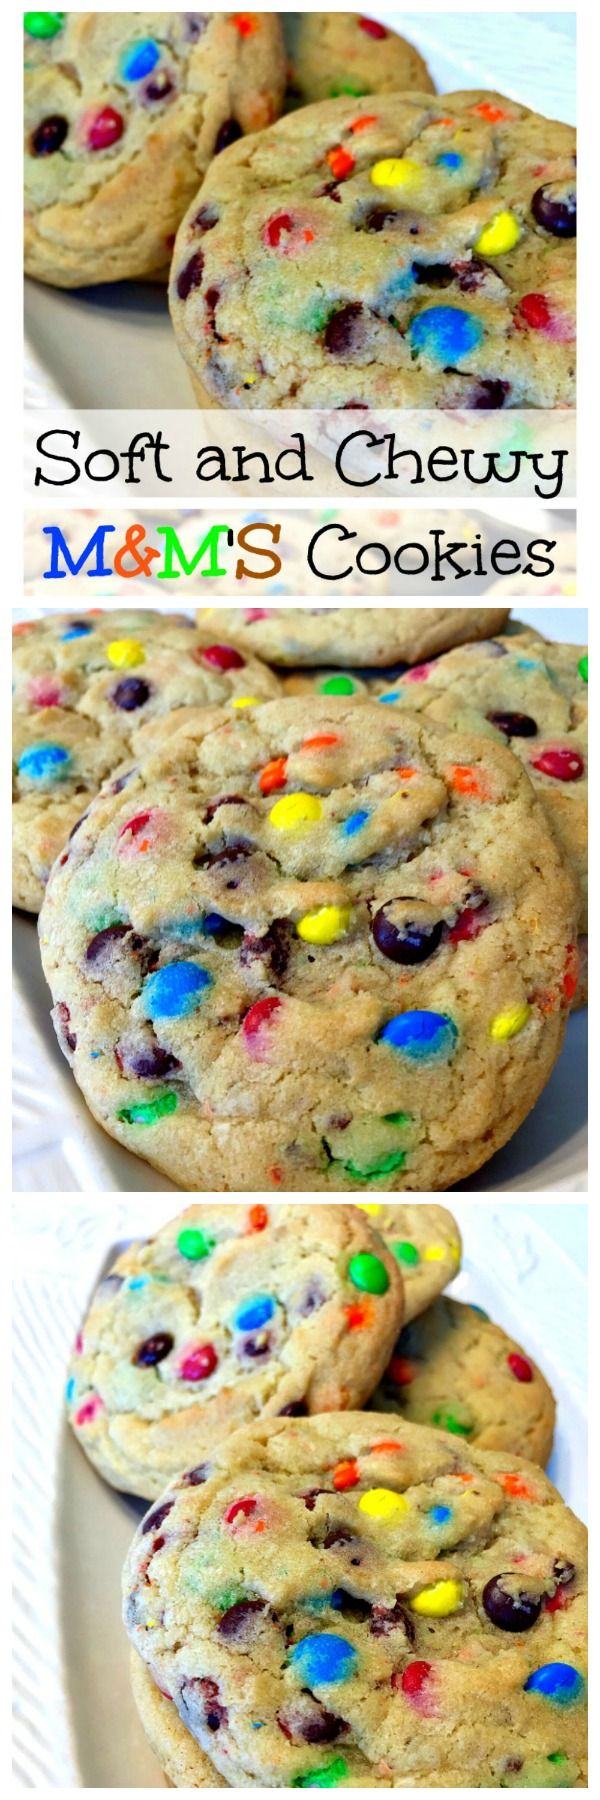 Soft and Chewy M&M'S Cookies